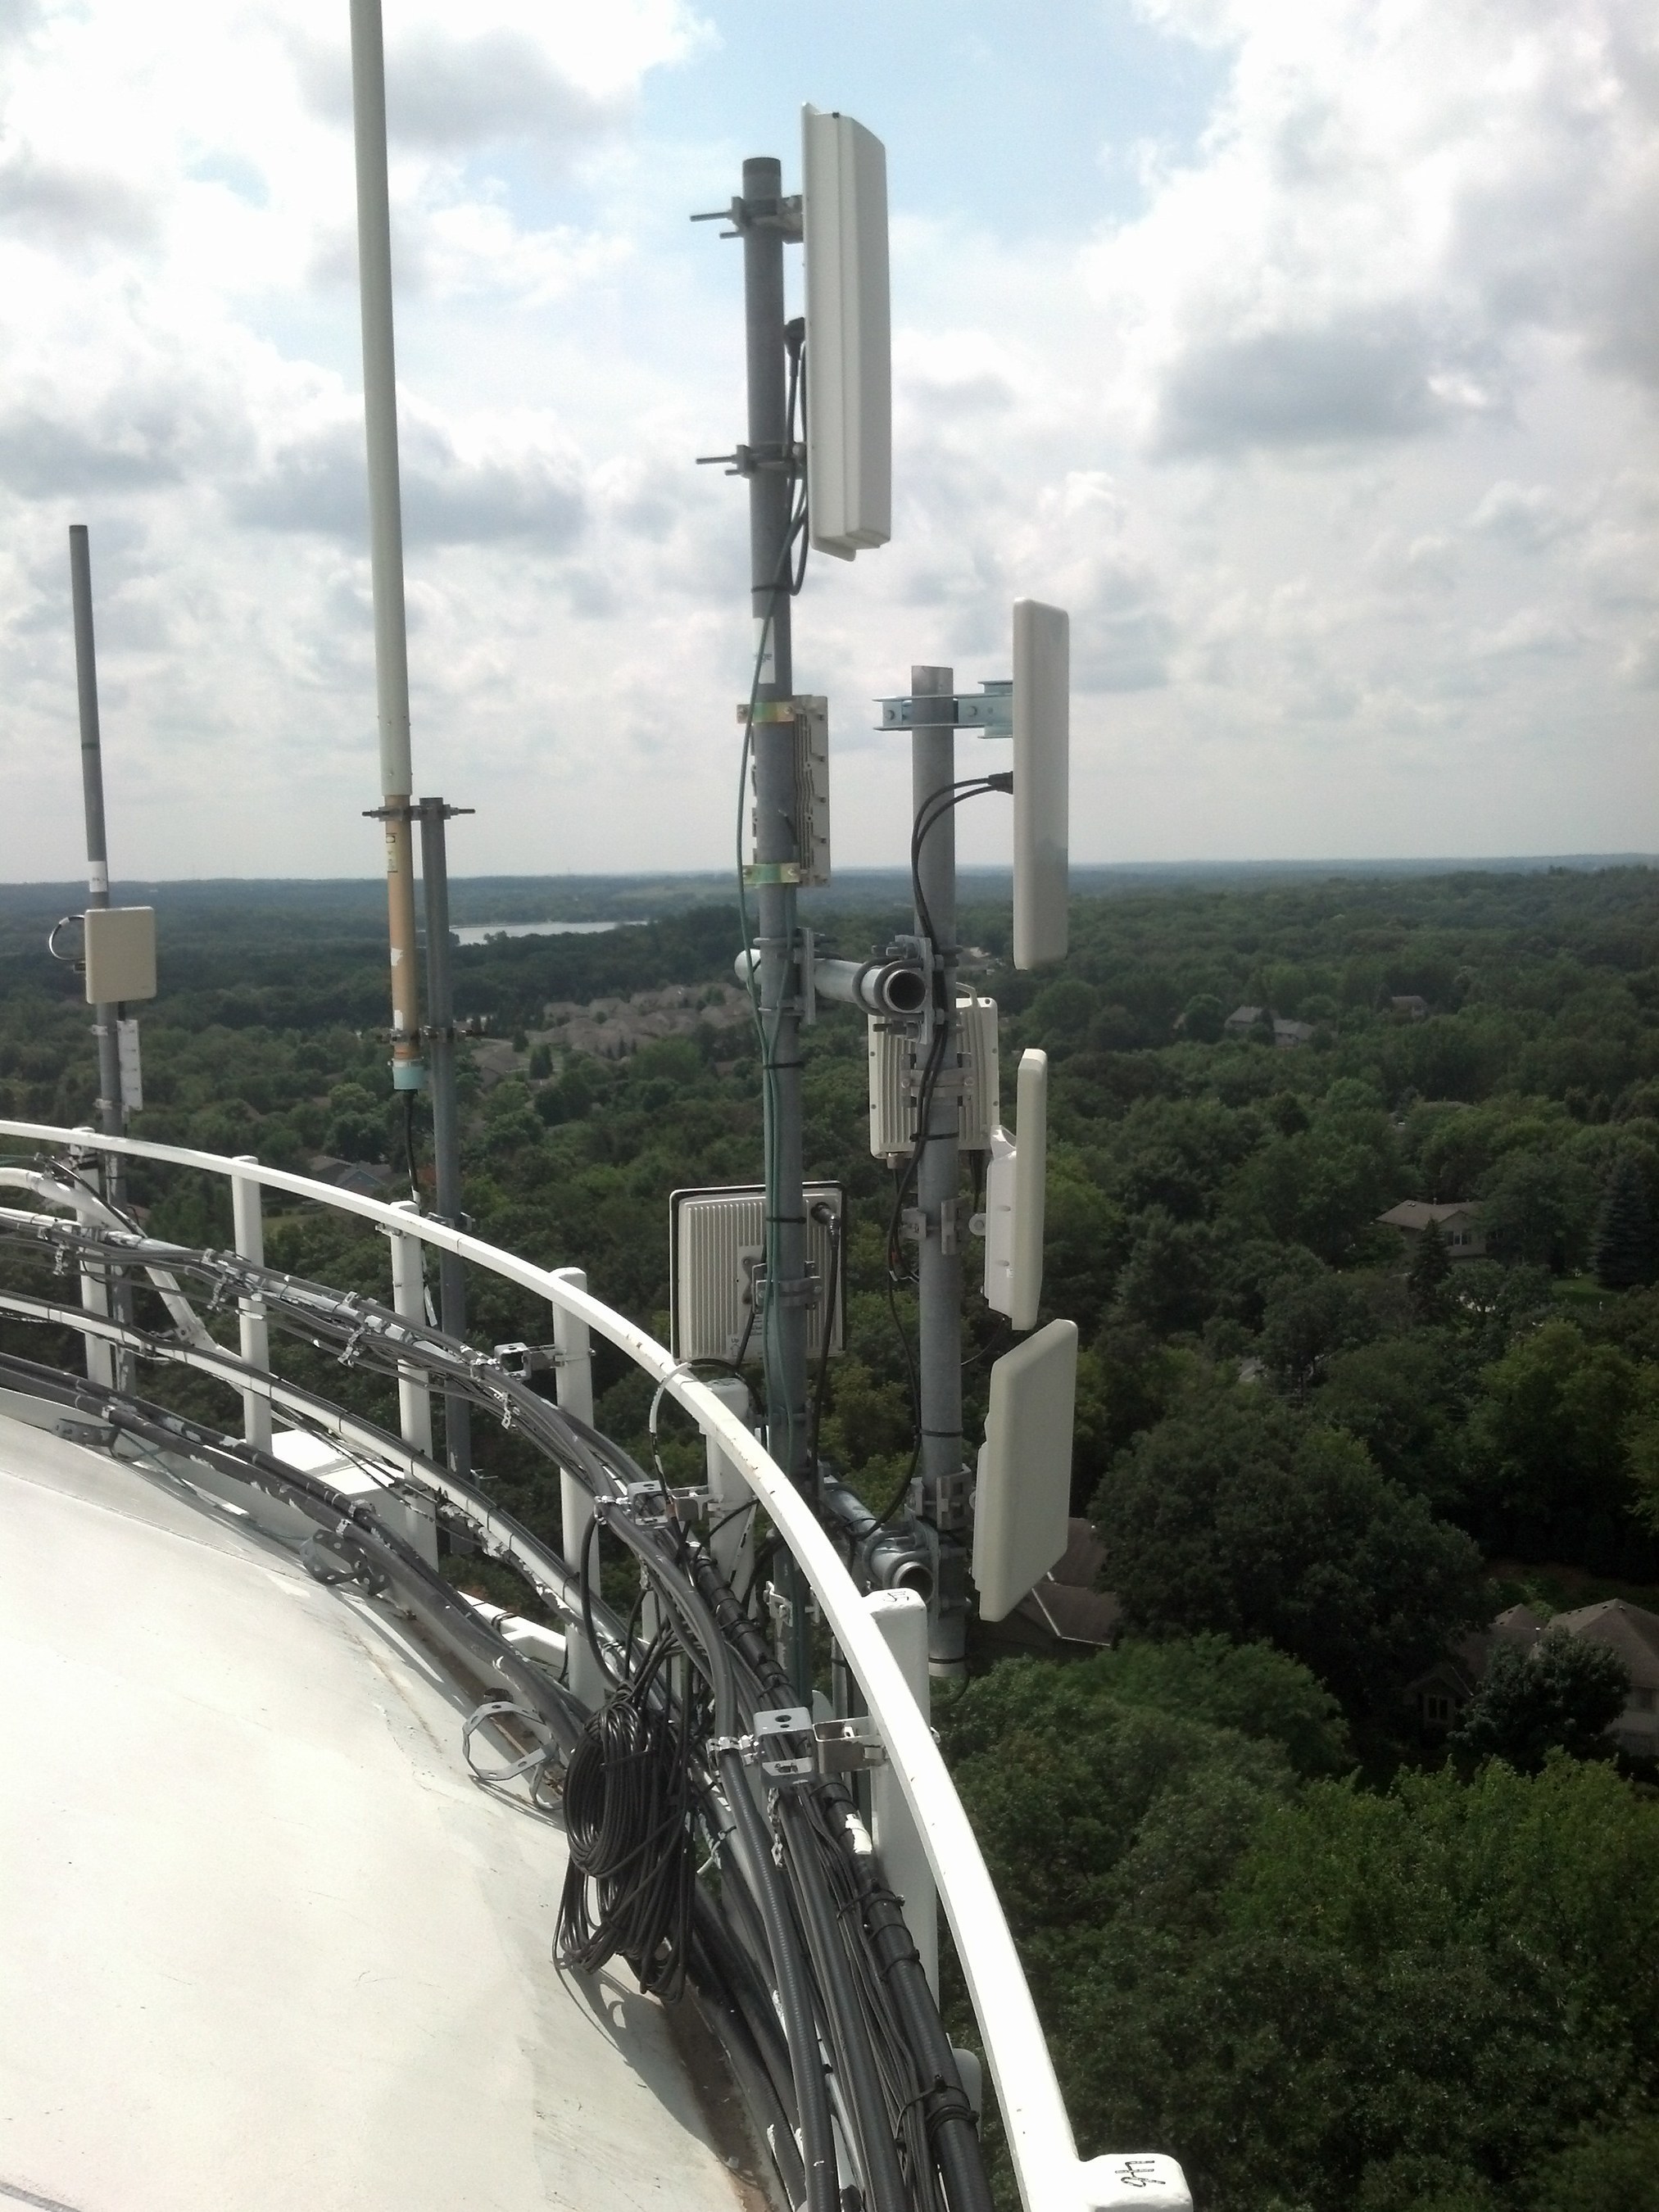 RADWIN PtMP and PtP radios deliver high-speed connectivity to Minnesota businesses